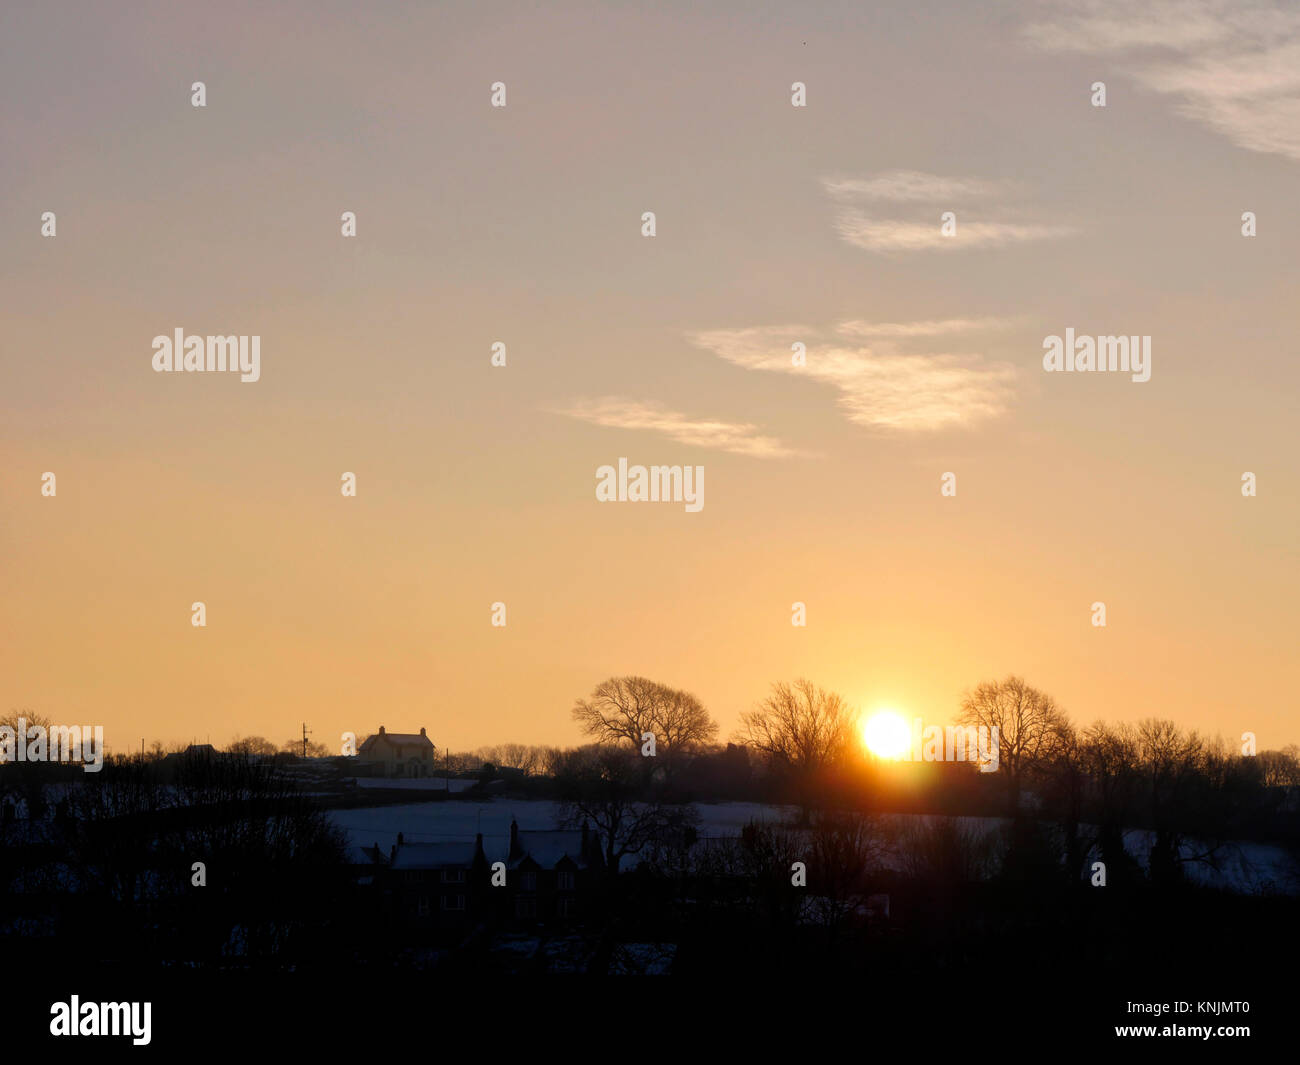 Ashbourne, Derbyshire. 12th Dec, 2017. UK Weather: cold frosty morning sunrise & snow scenes around the market town of Ashbourne Derbyshire in the Peak District National Park Credit: Doug Blane/Alamy Live News Stock Photo